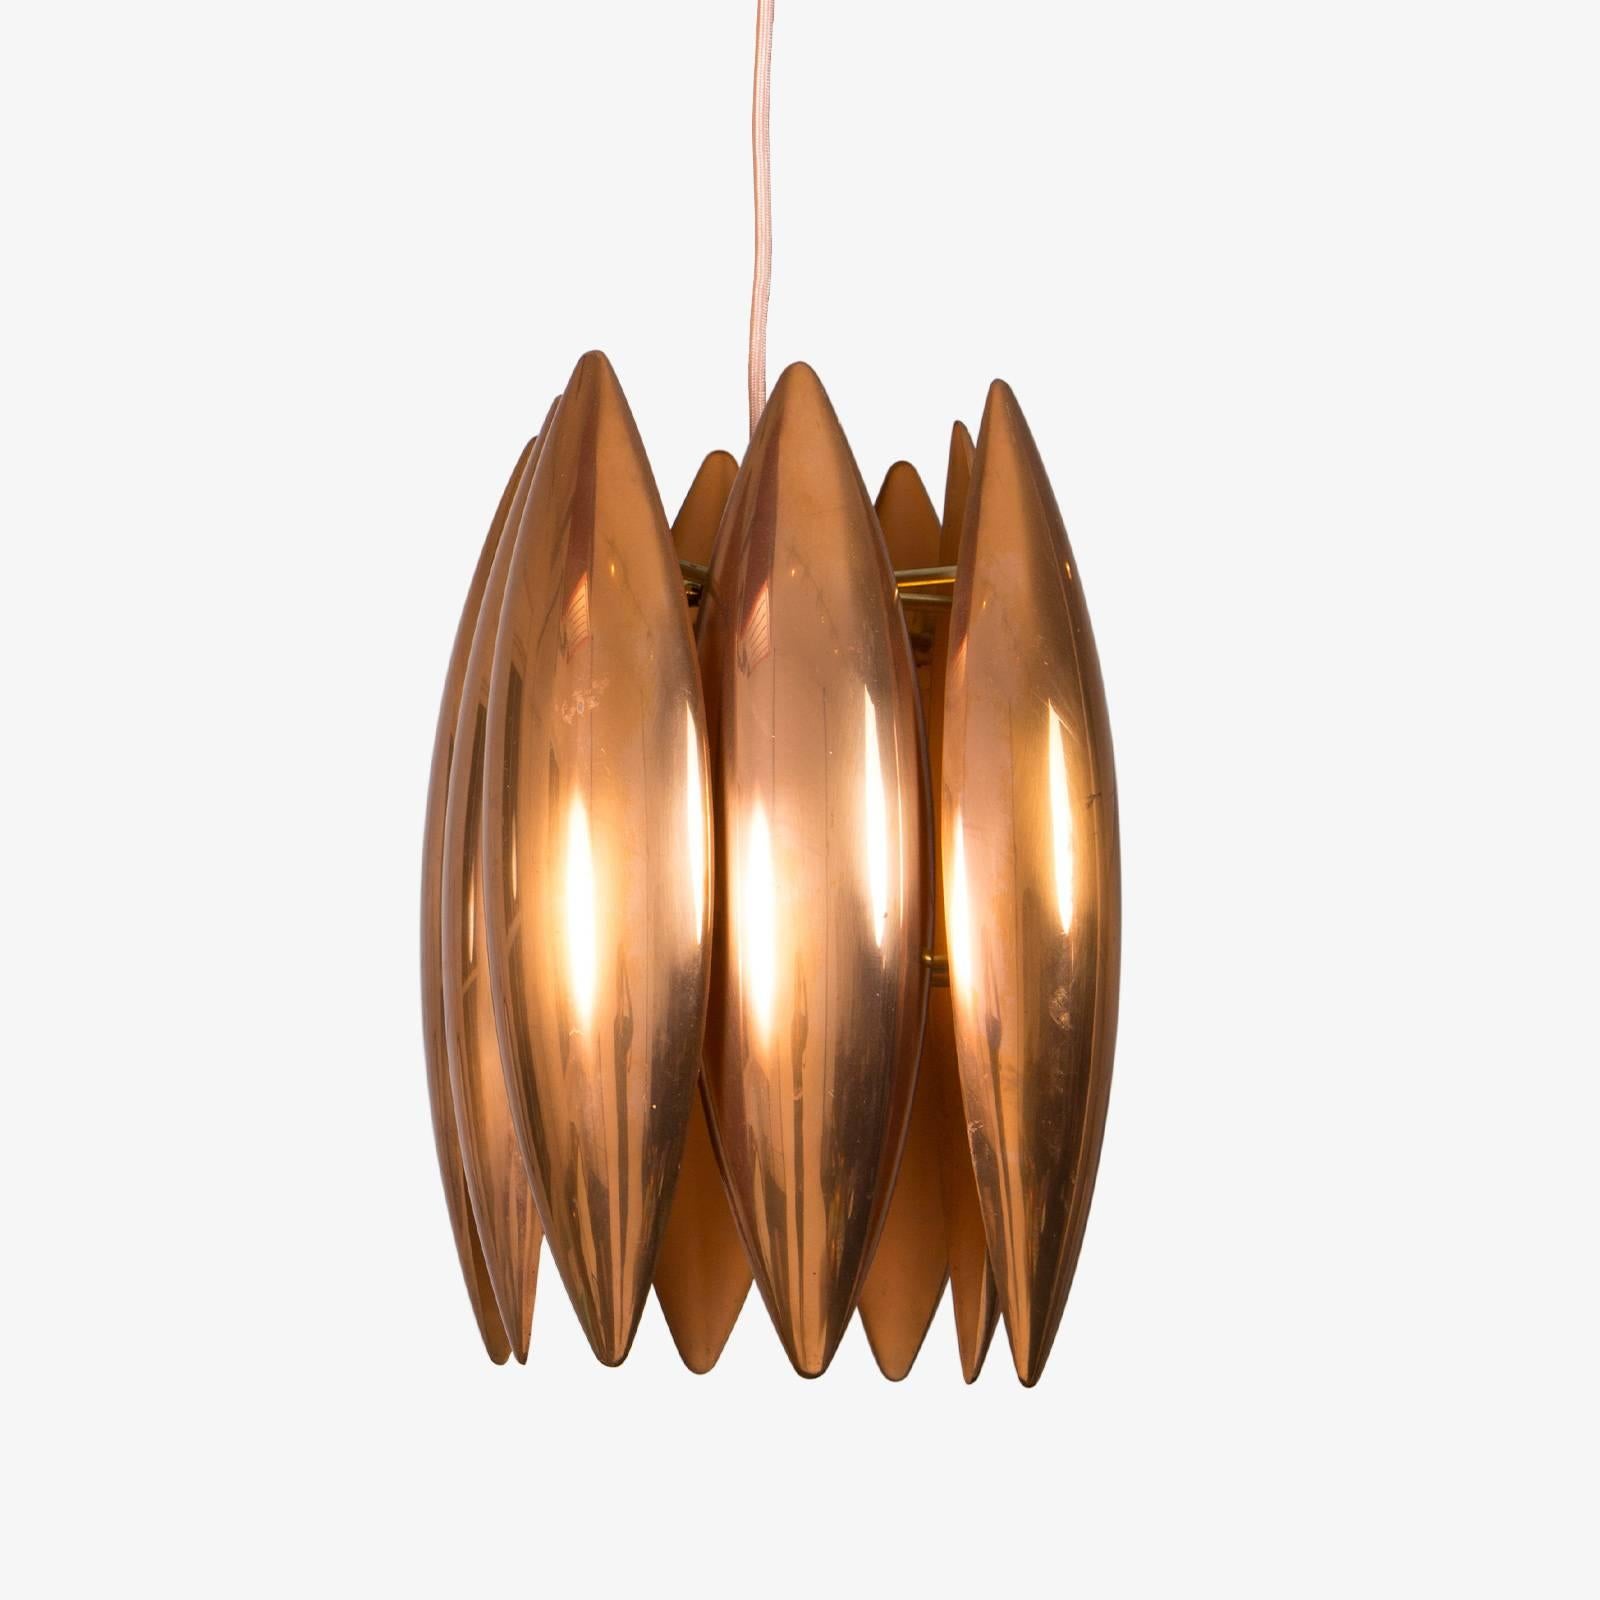 Midcentury Danish Copper Kastor pendant by Jo Hammerborg for Fog & Mørup.  The black cord has been changed to a copper/pink colored cloth cord as seen in the secondary images.